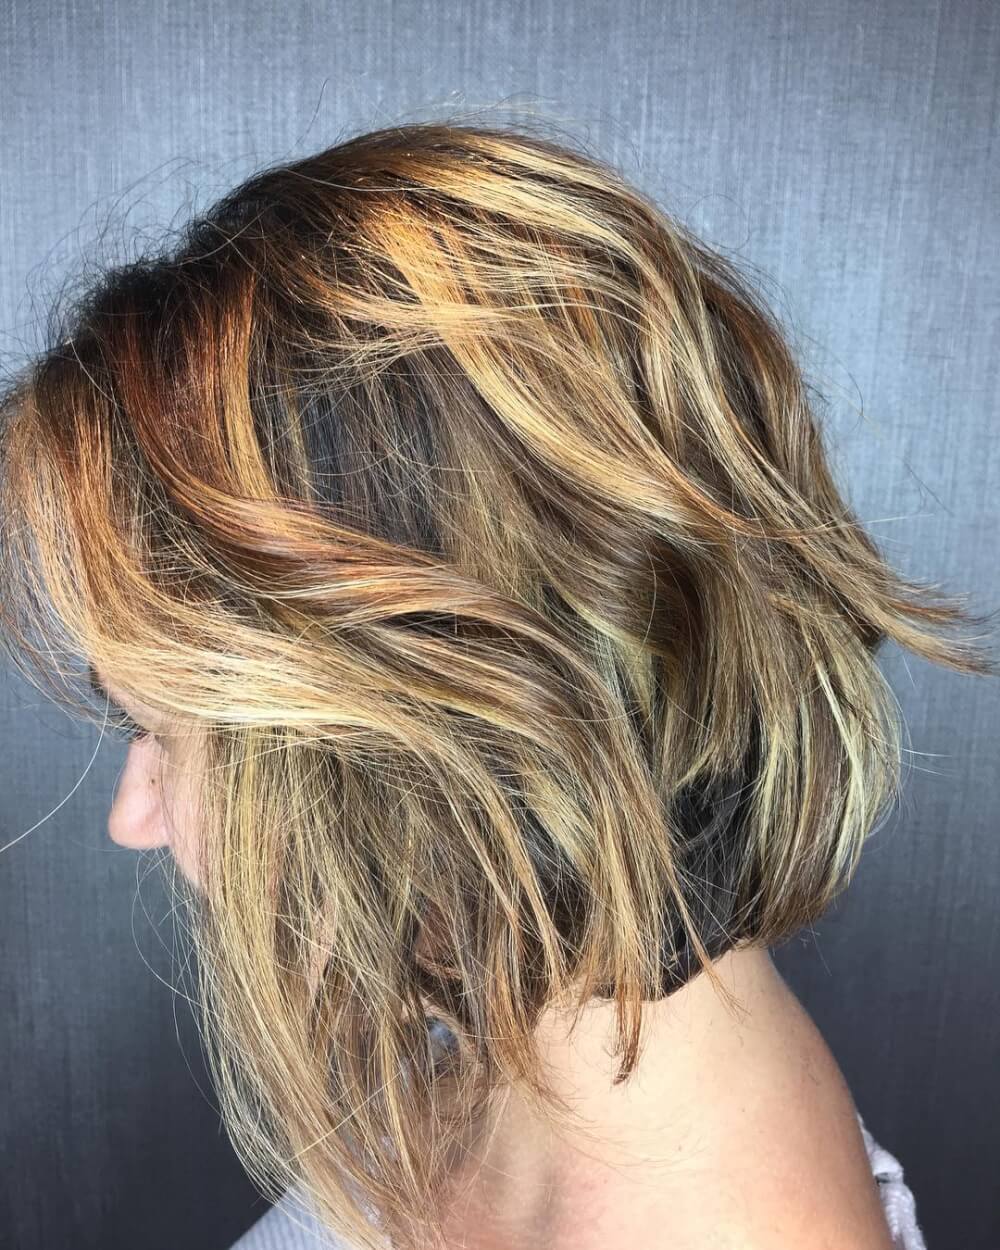 An effortless short razored bob with highlights